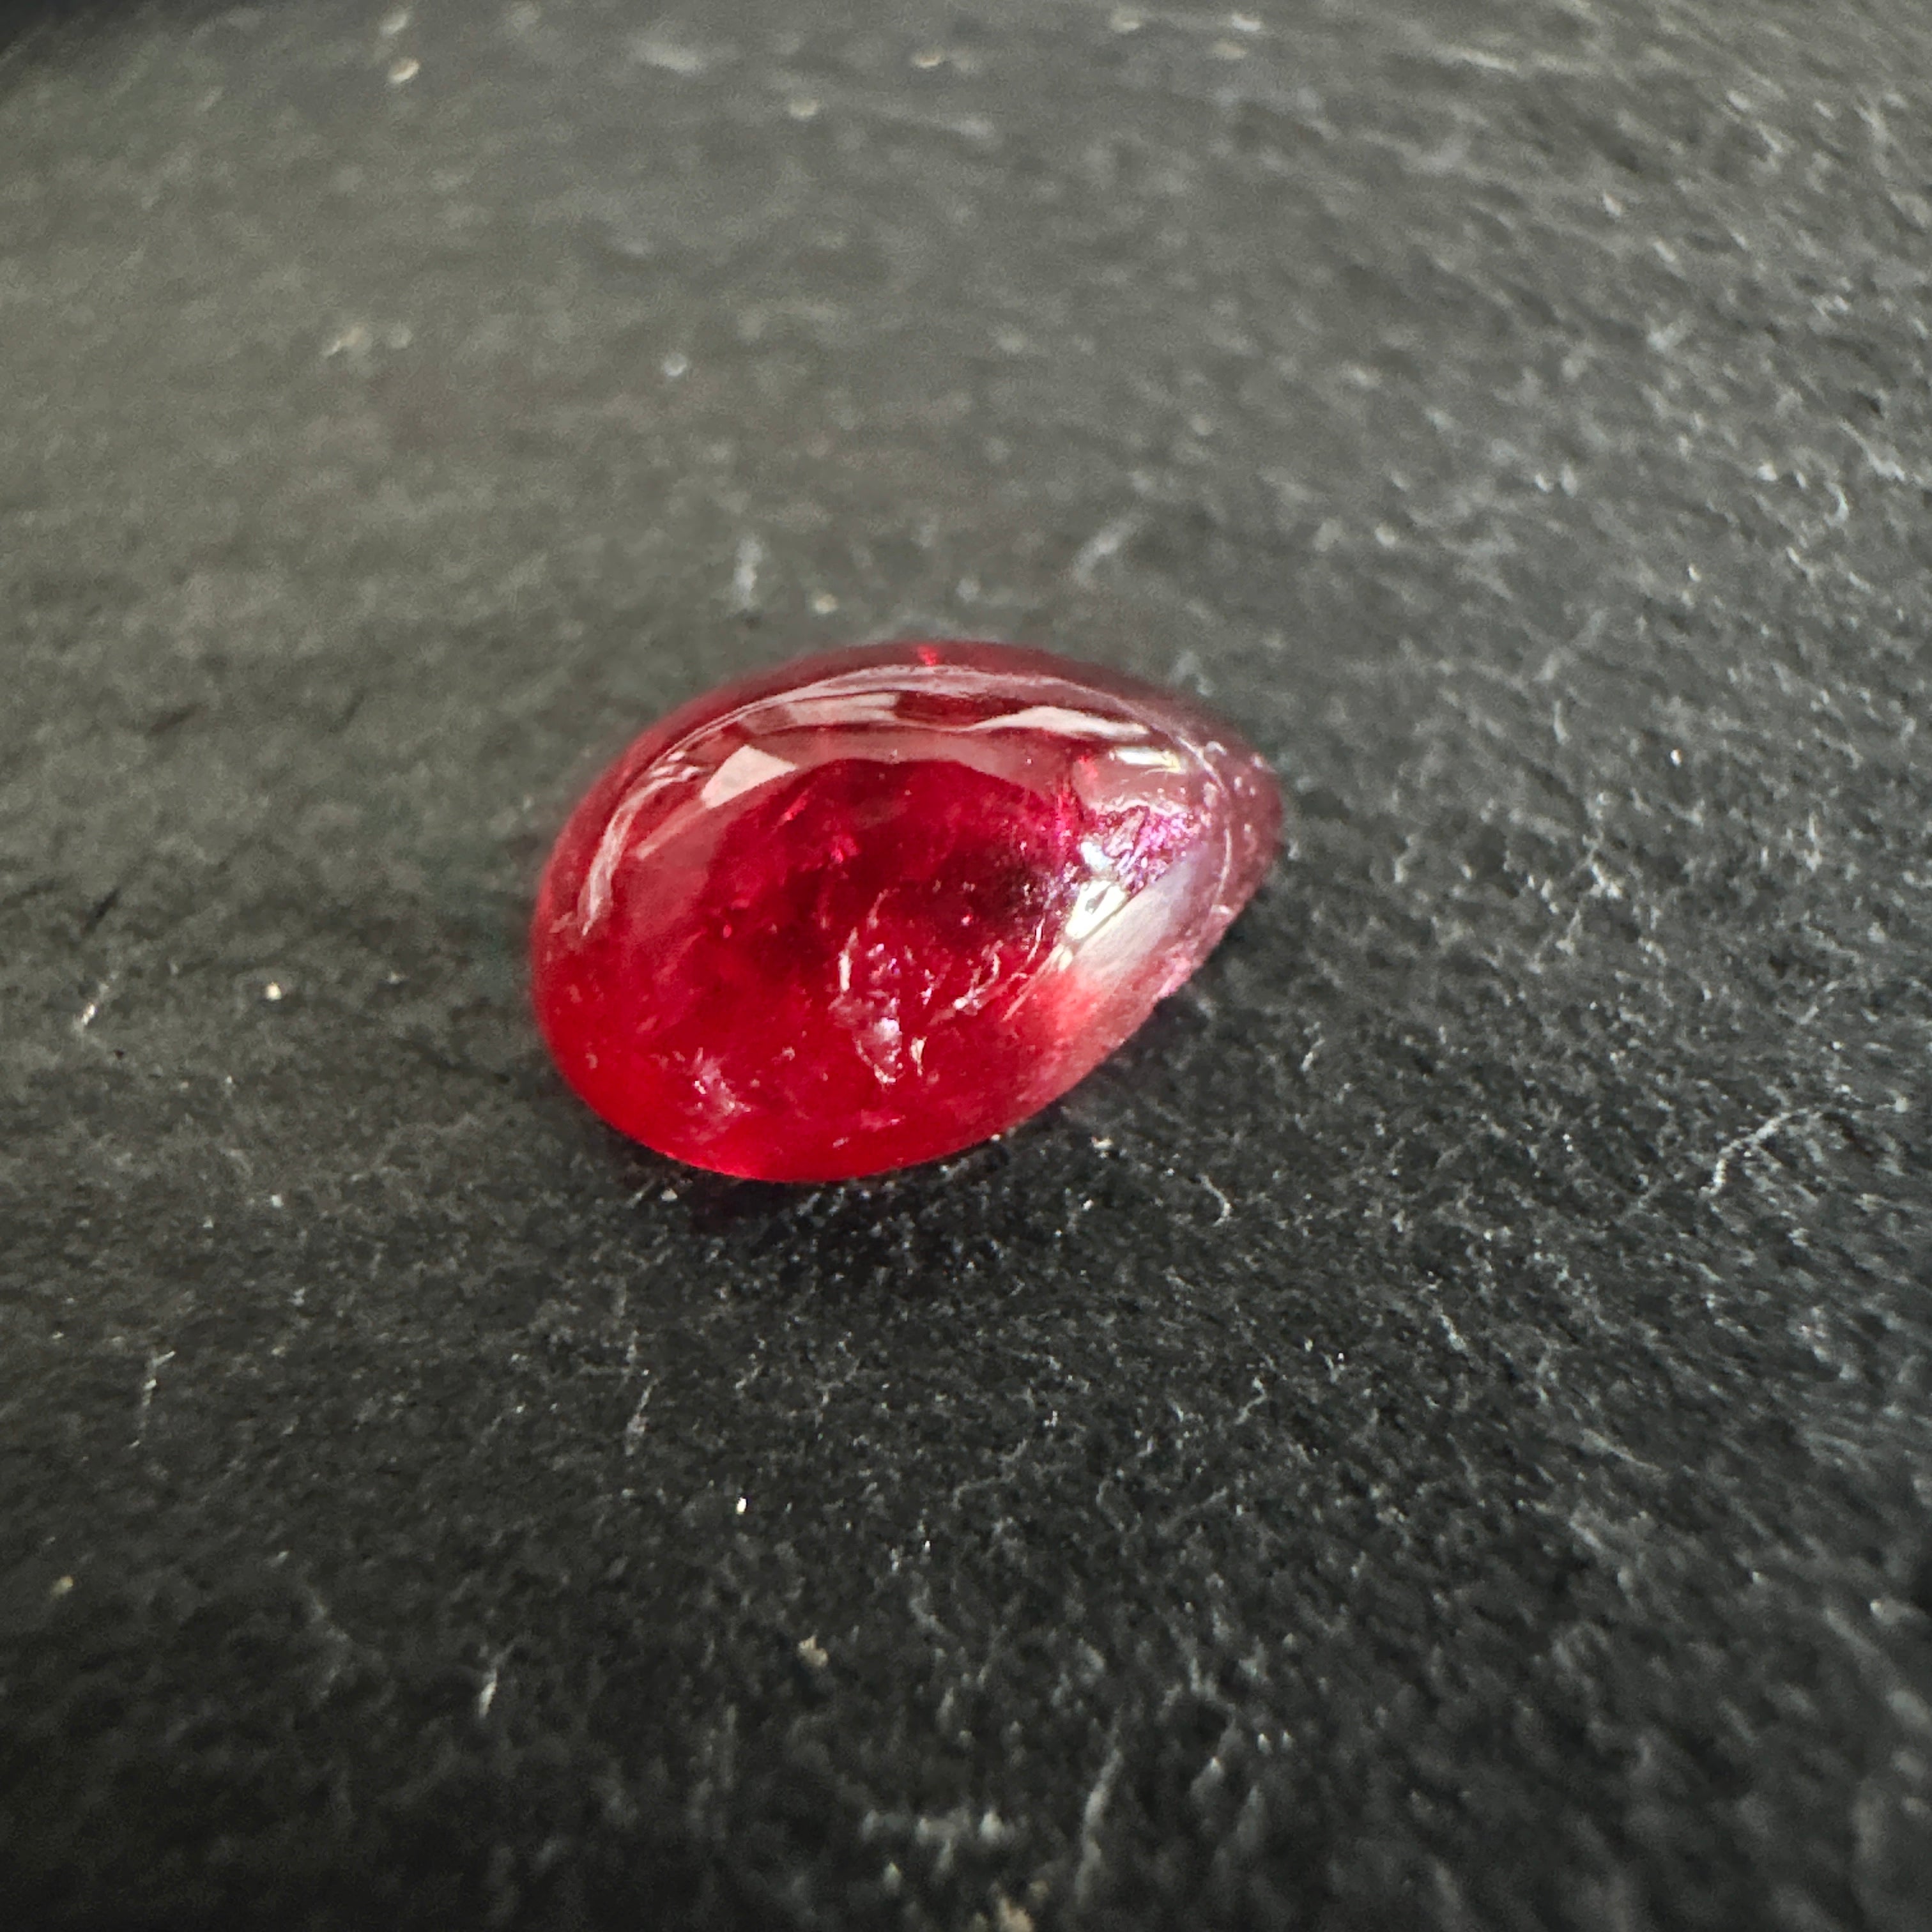 0.84ct Ruby Cabochon, Longido Mines, Tanzania. Untreated Unheated, this cab does have groves on the dome but fantastic colour